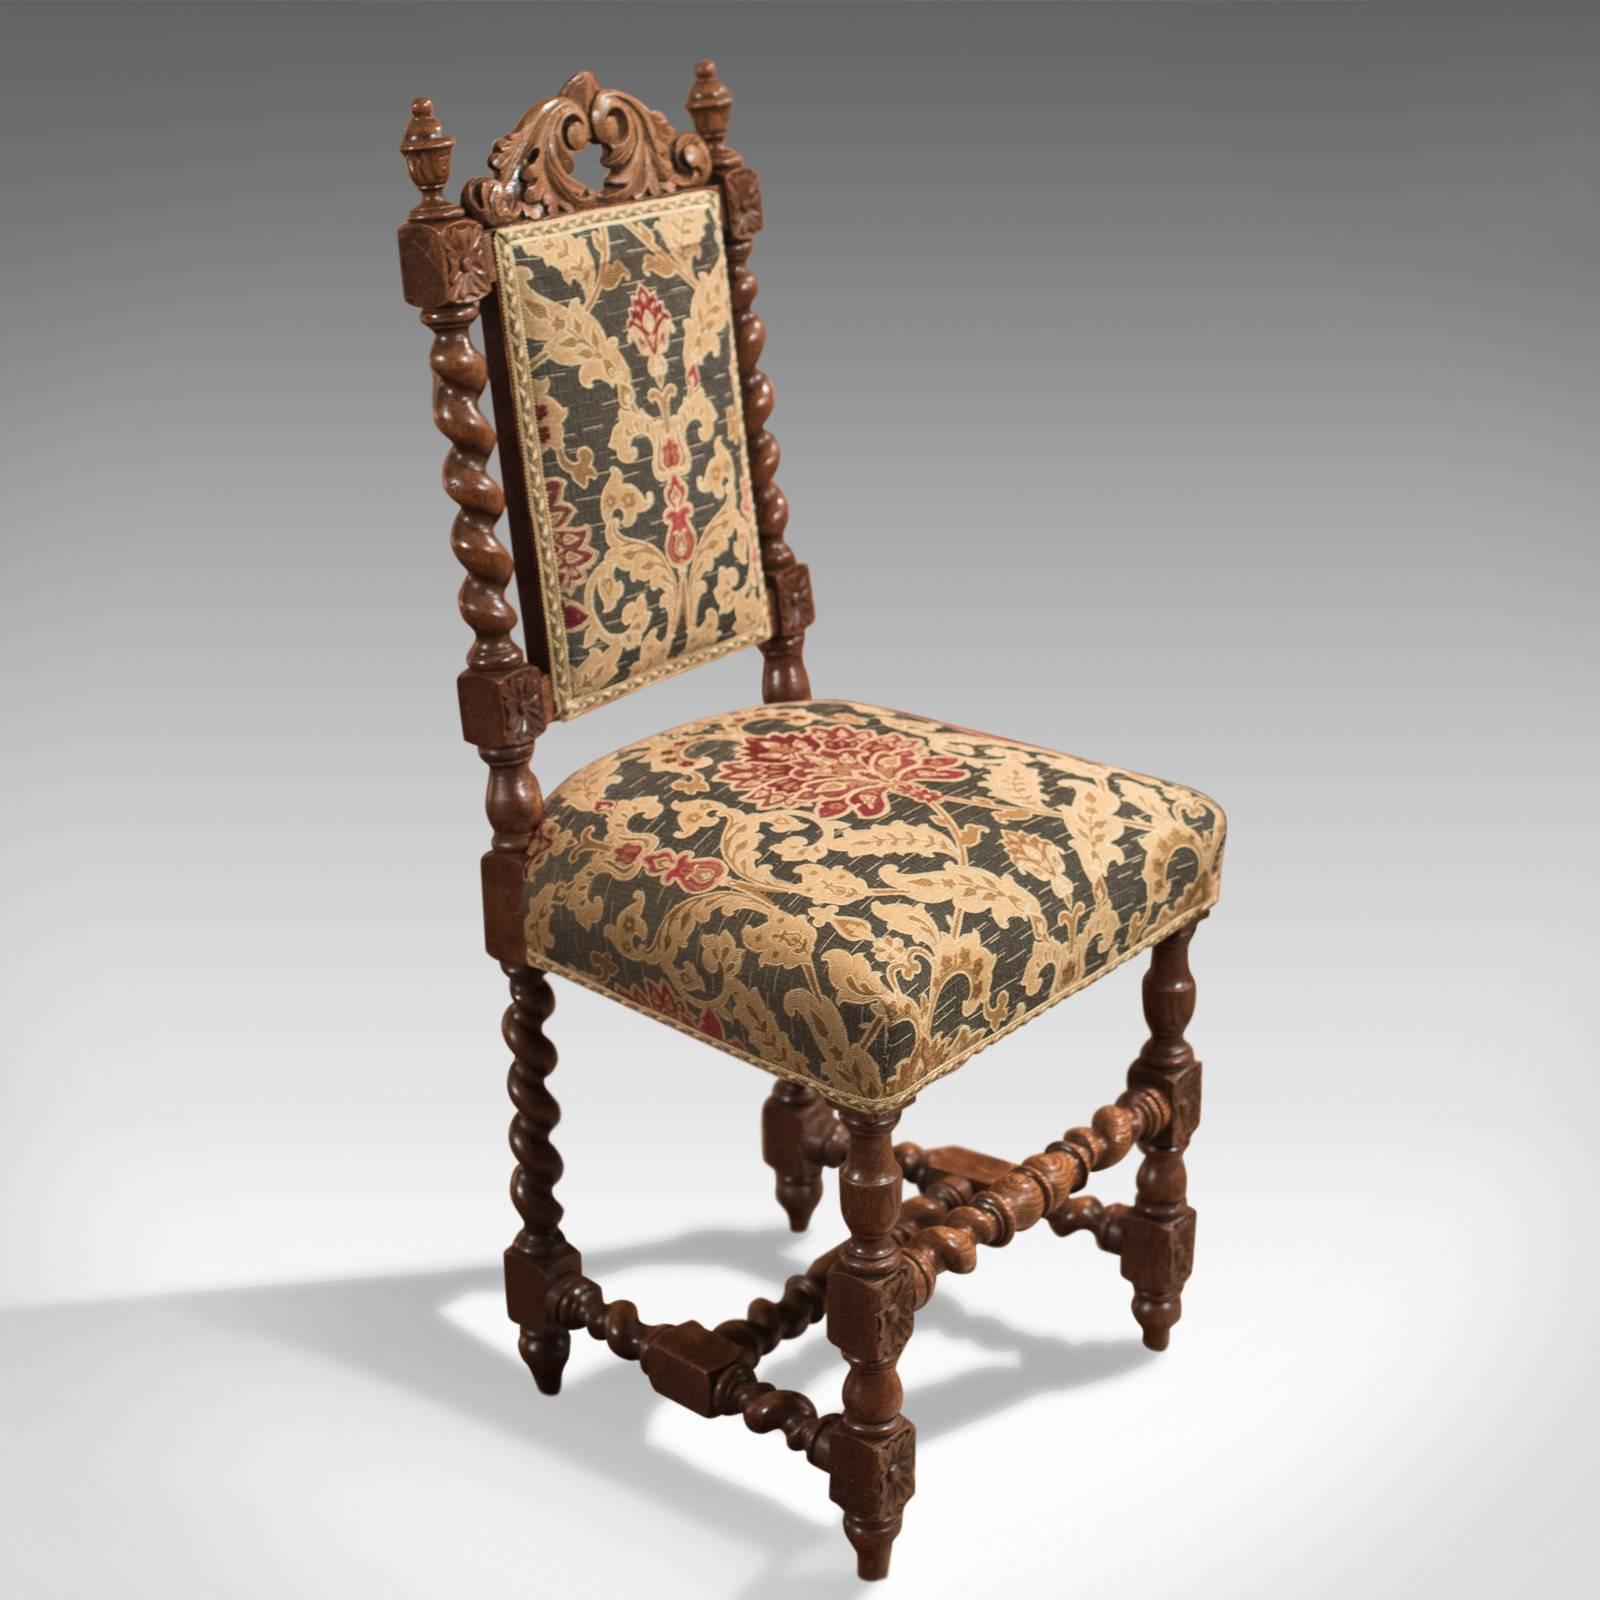 Gothic Revival 19th Century Pair of Antique Hall Chairs, Victorian, Oak Needlepoint, circa 1870